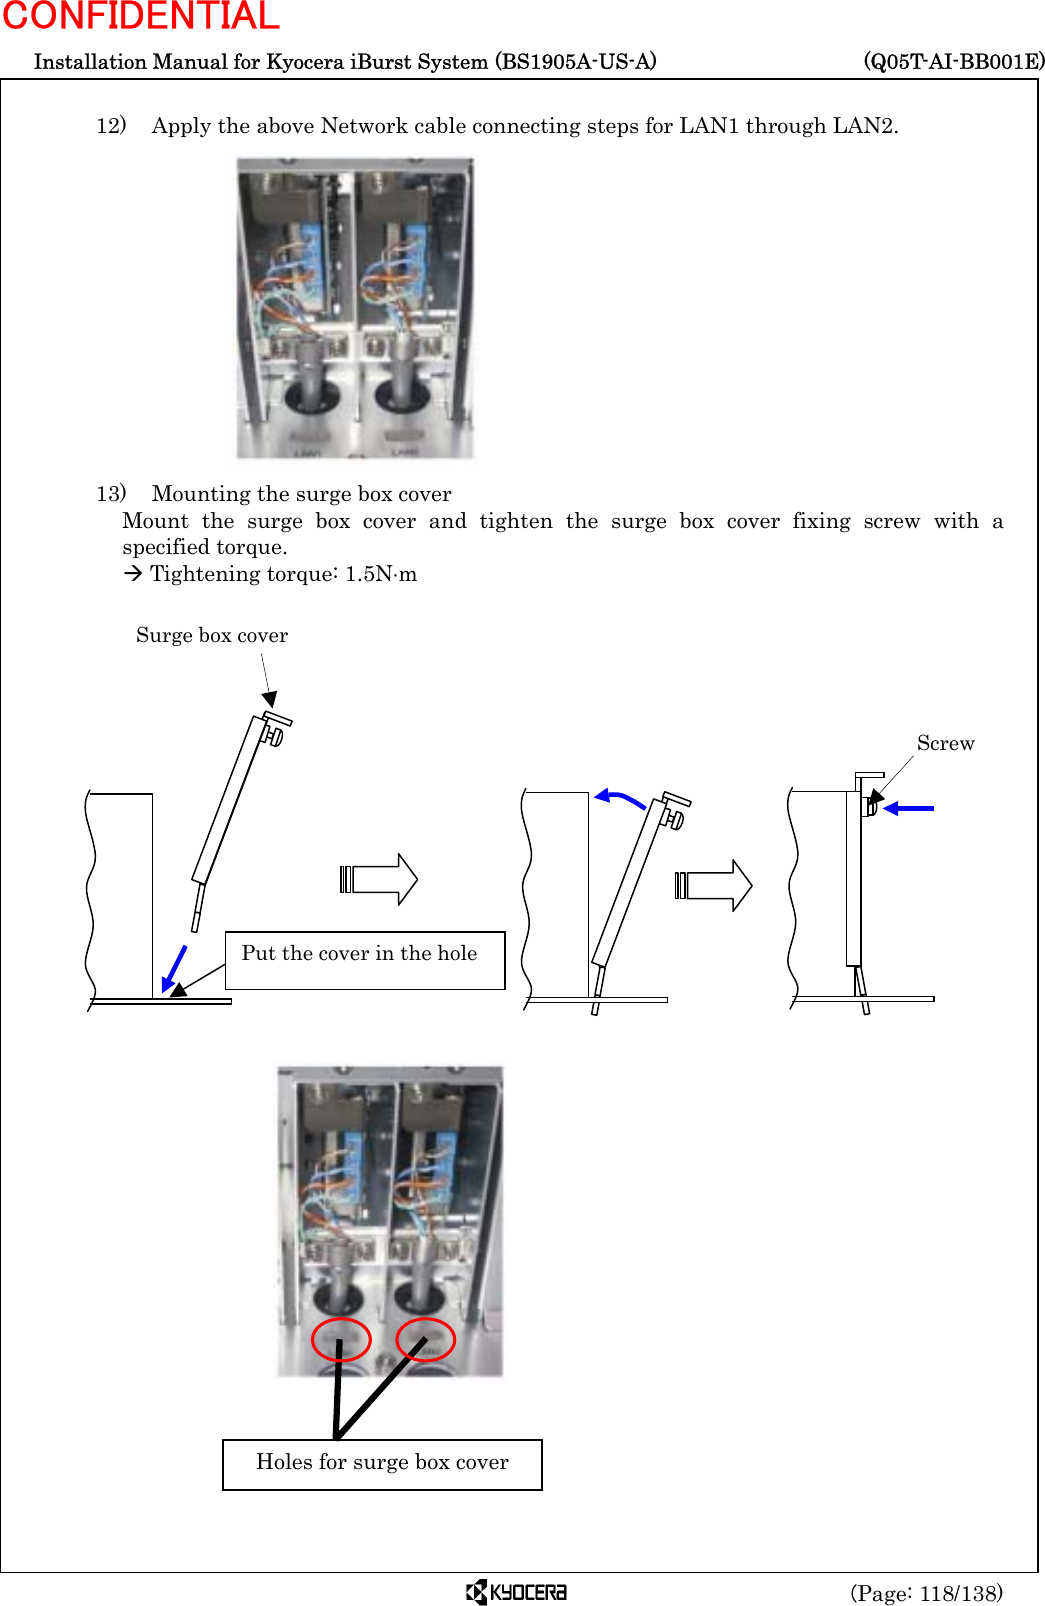  Installation Manual for Kyocera iBurst System (BS1905A-US-A)     (Q05T-AI-BB001E) (Page: 118/138) CONFIDENTIAL  12)    Apply the above Network cable connecting steps for LAN1 through LAN2.              13)    Mounting the surge box cover Mount the surge box cover and tighten the surge box cover fixing screw with a specified torque. Æ Tightening torque: 1.5N⋅m                                  Holes for surge box cover Surge box cover  Screw  Put the cover in the hole 